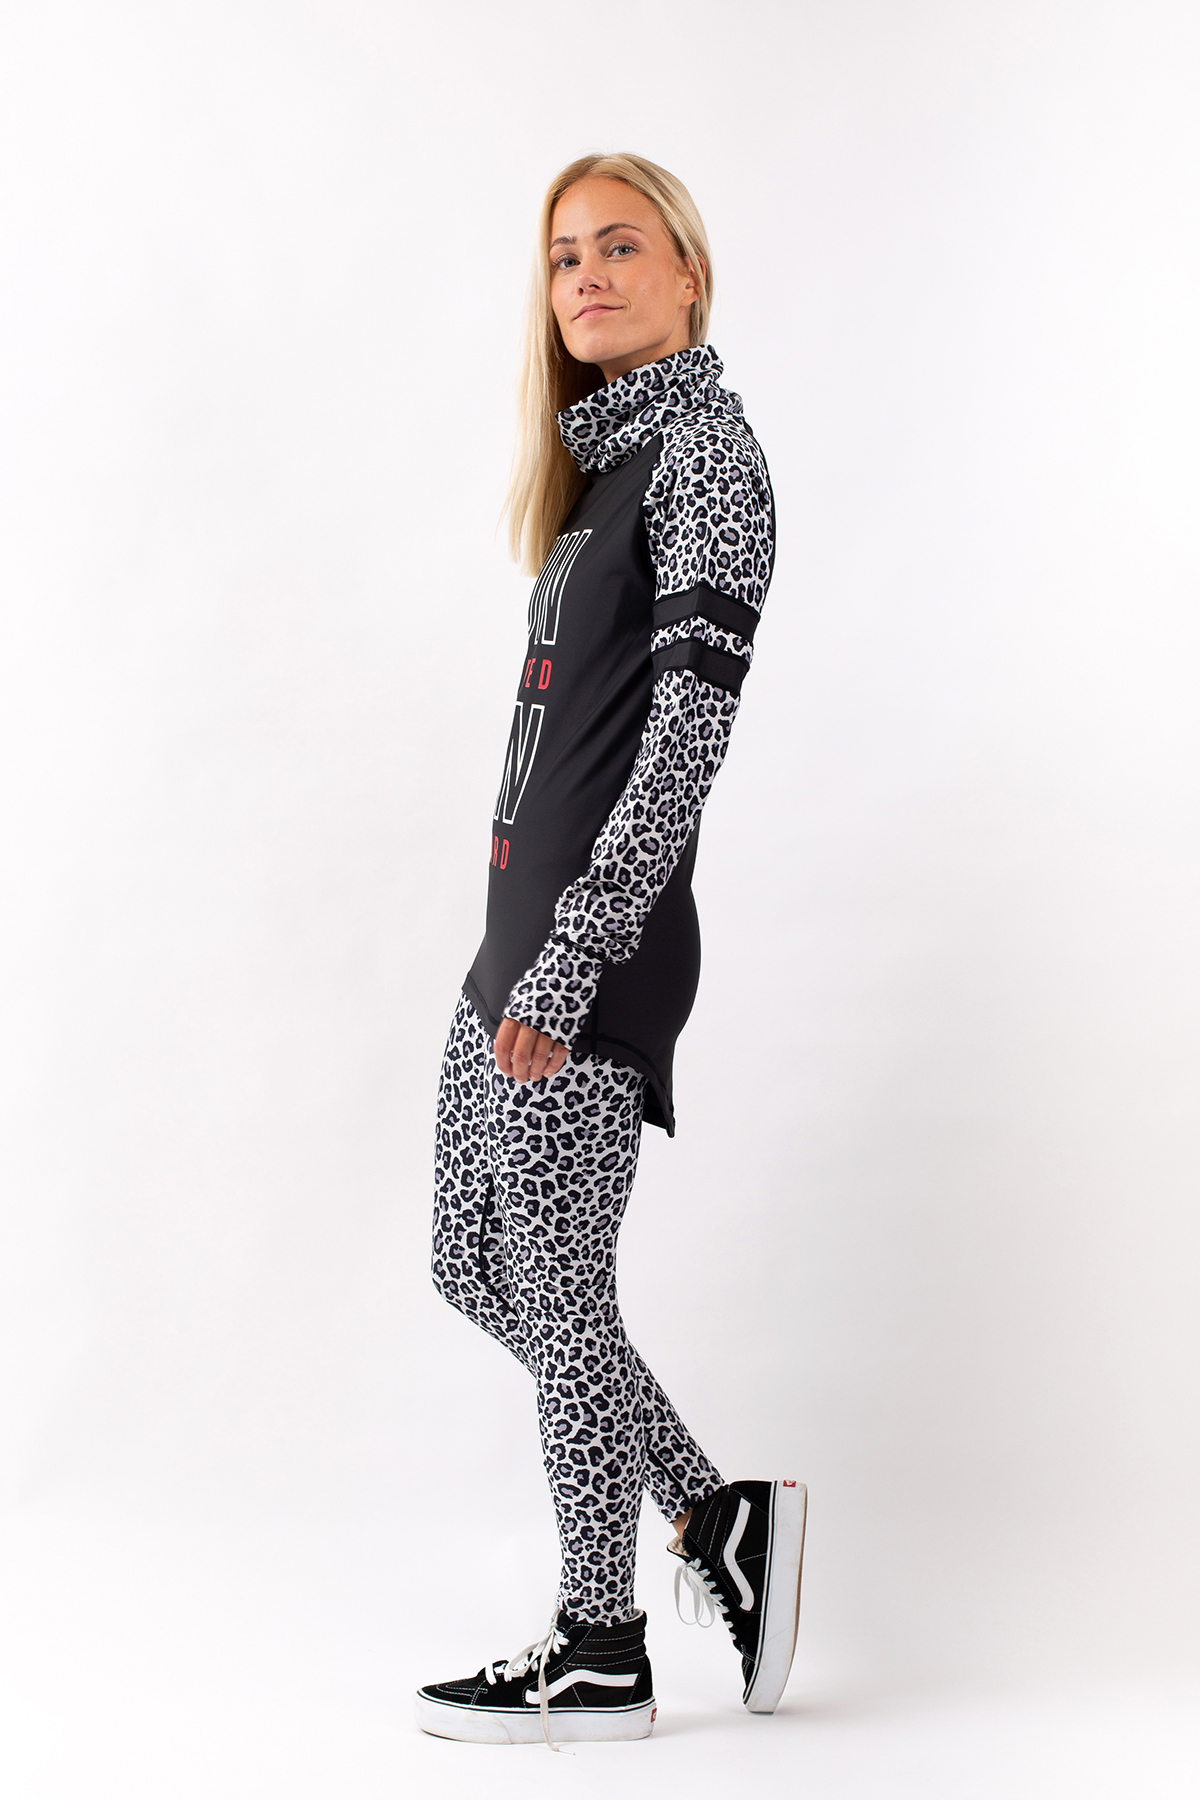 Base Layer | Icecold Top - Snow Leopard | XXS